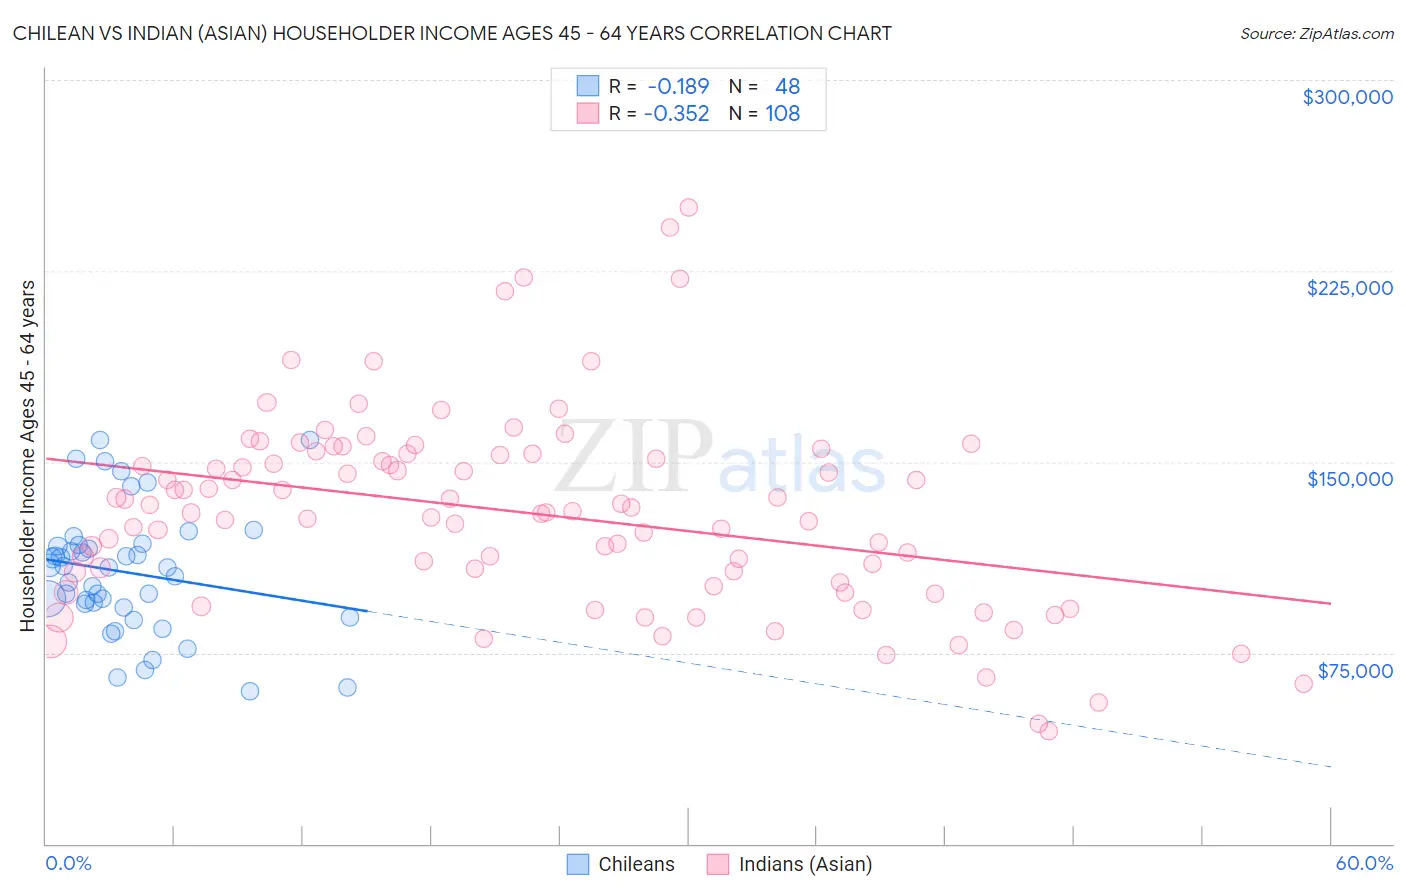 Chilean vs Indian (Asian) Householder Income Ages 45 - 64 years